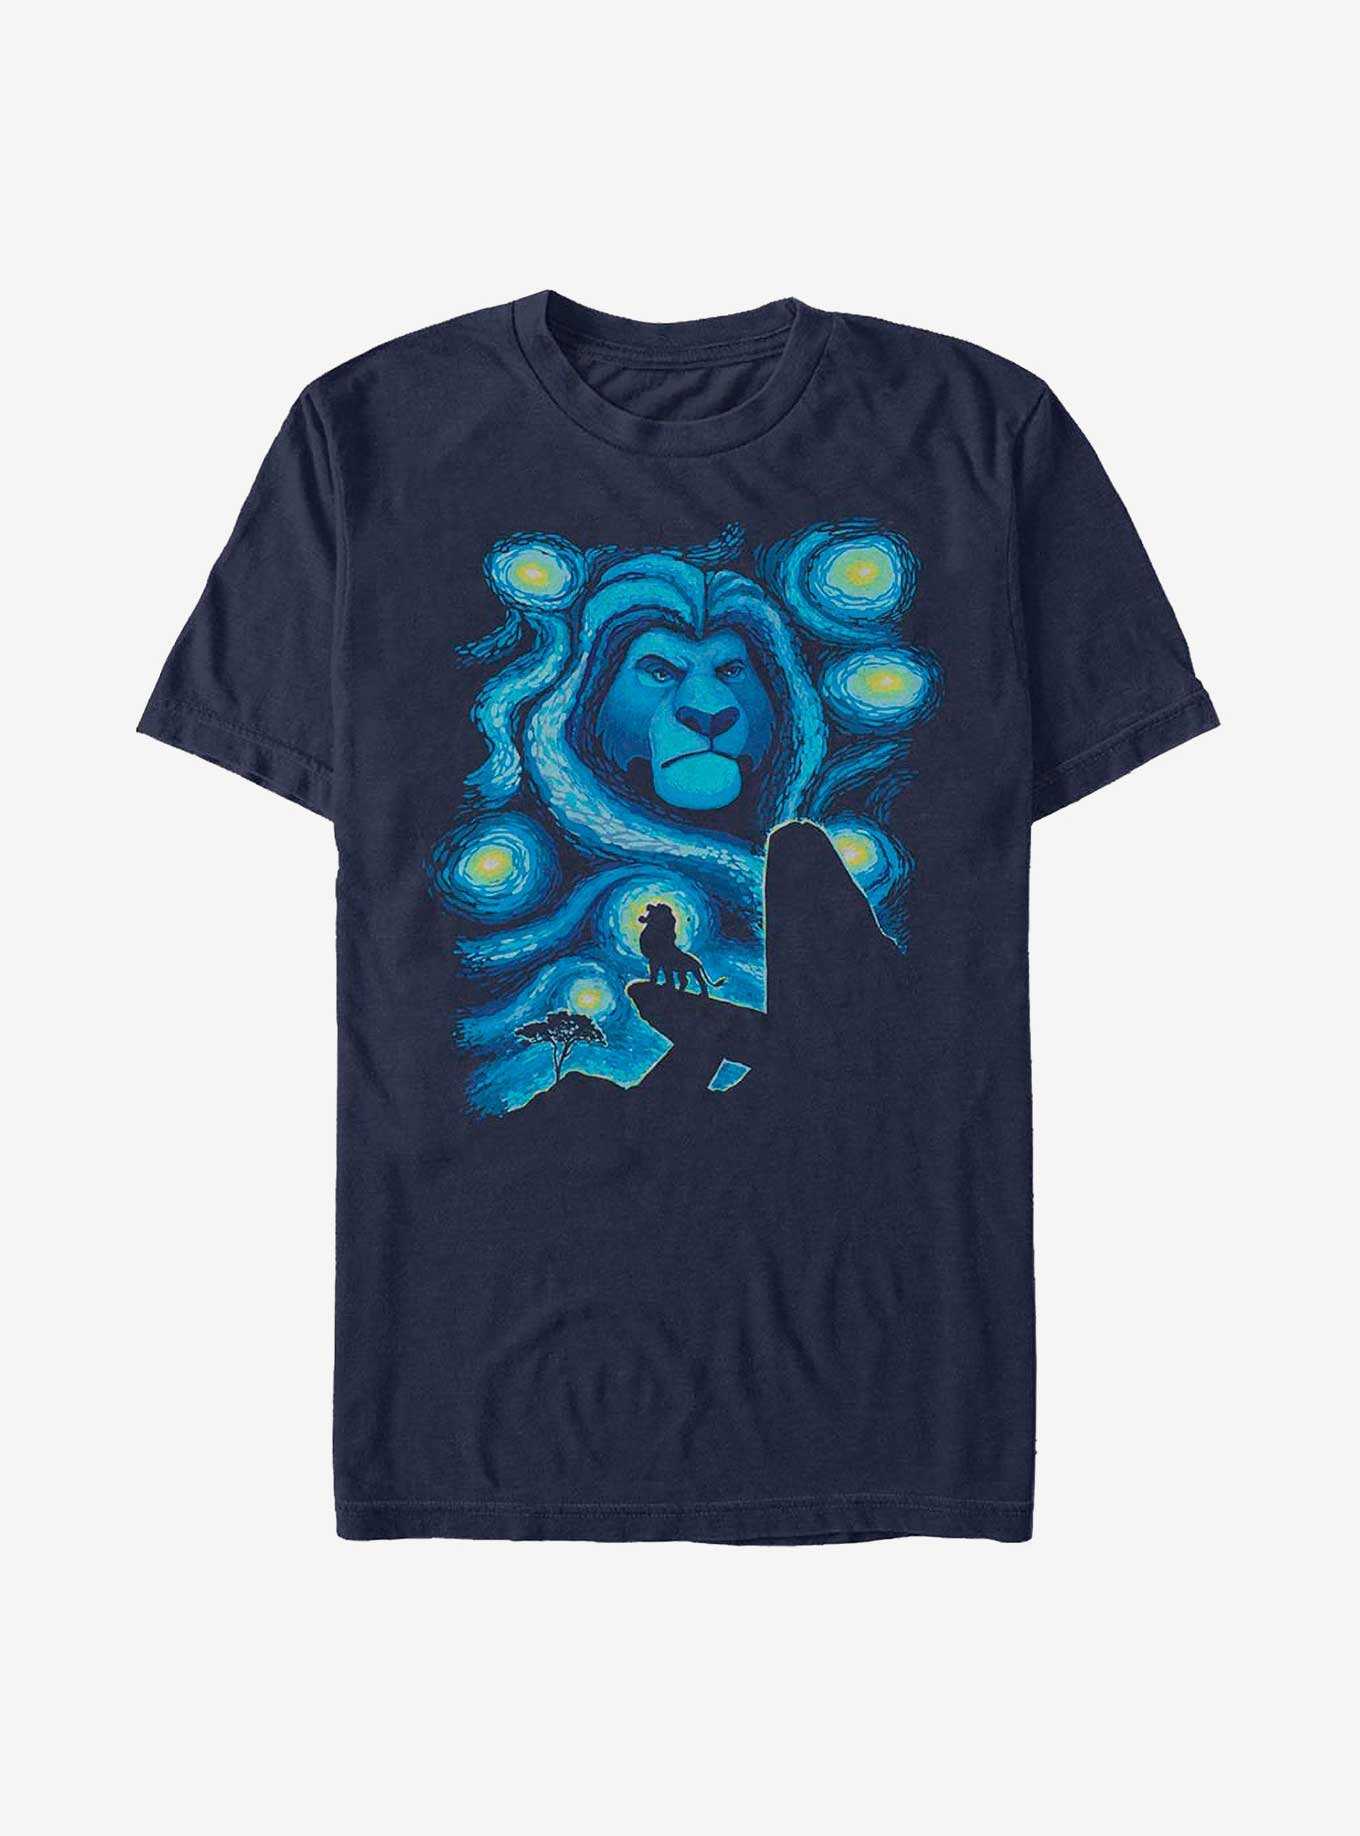 Disney The Lion King Starry Pridelands Mufasa and Simba T-Shirt, , hi-res